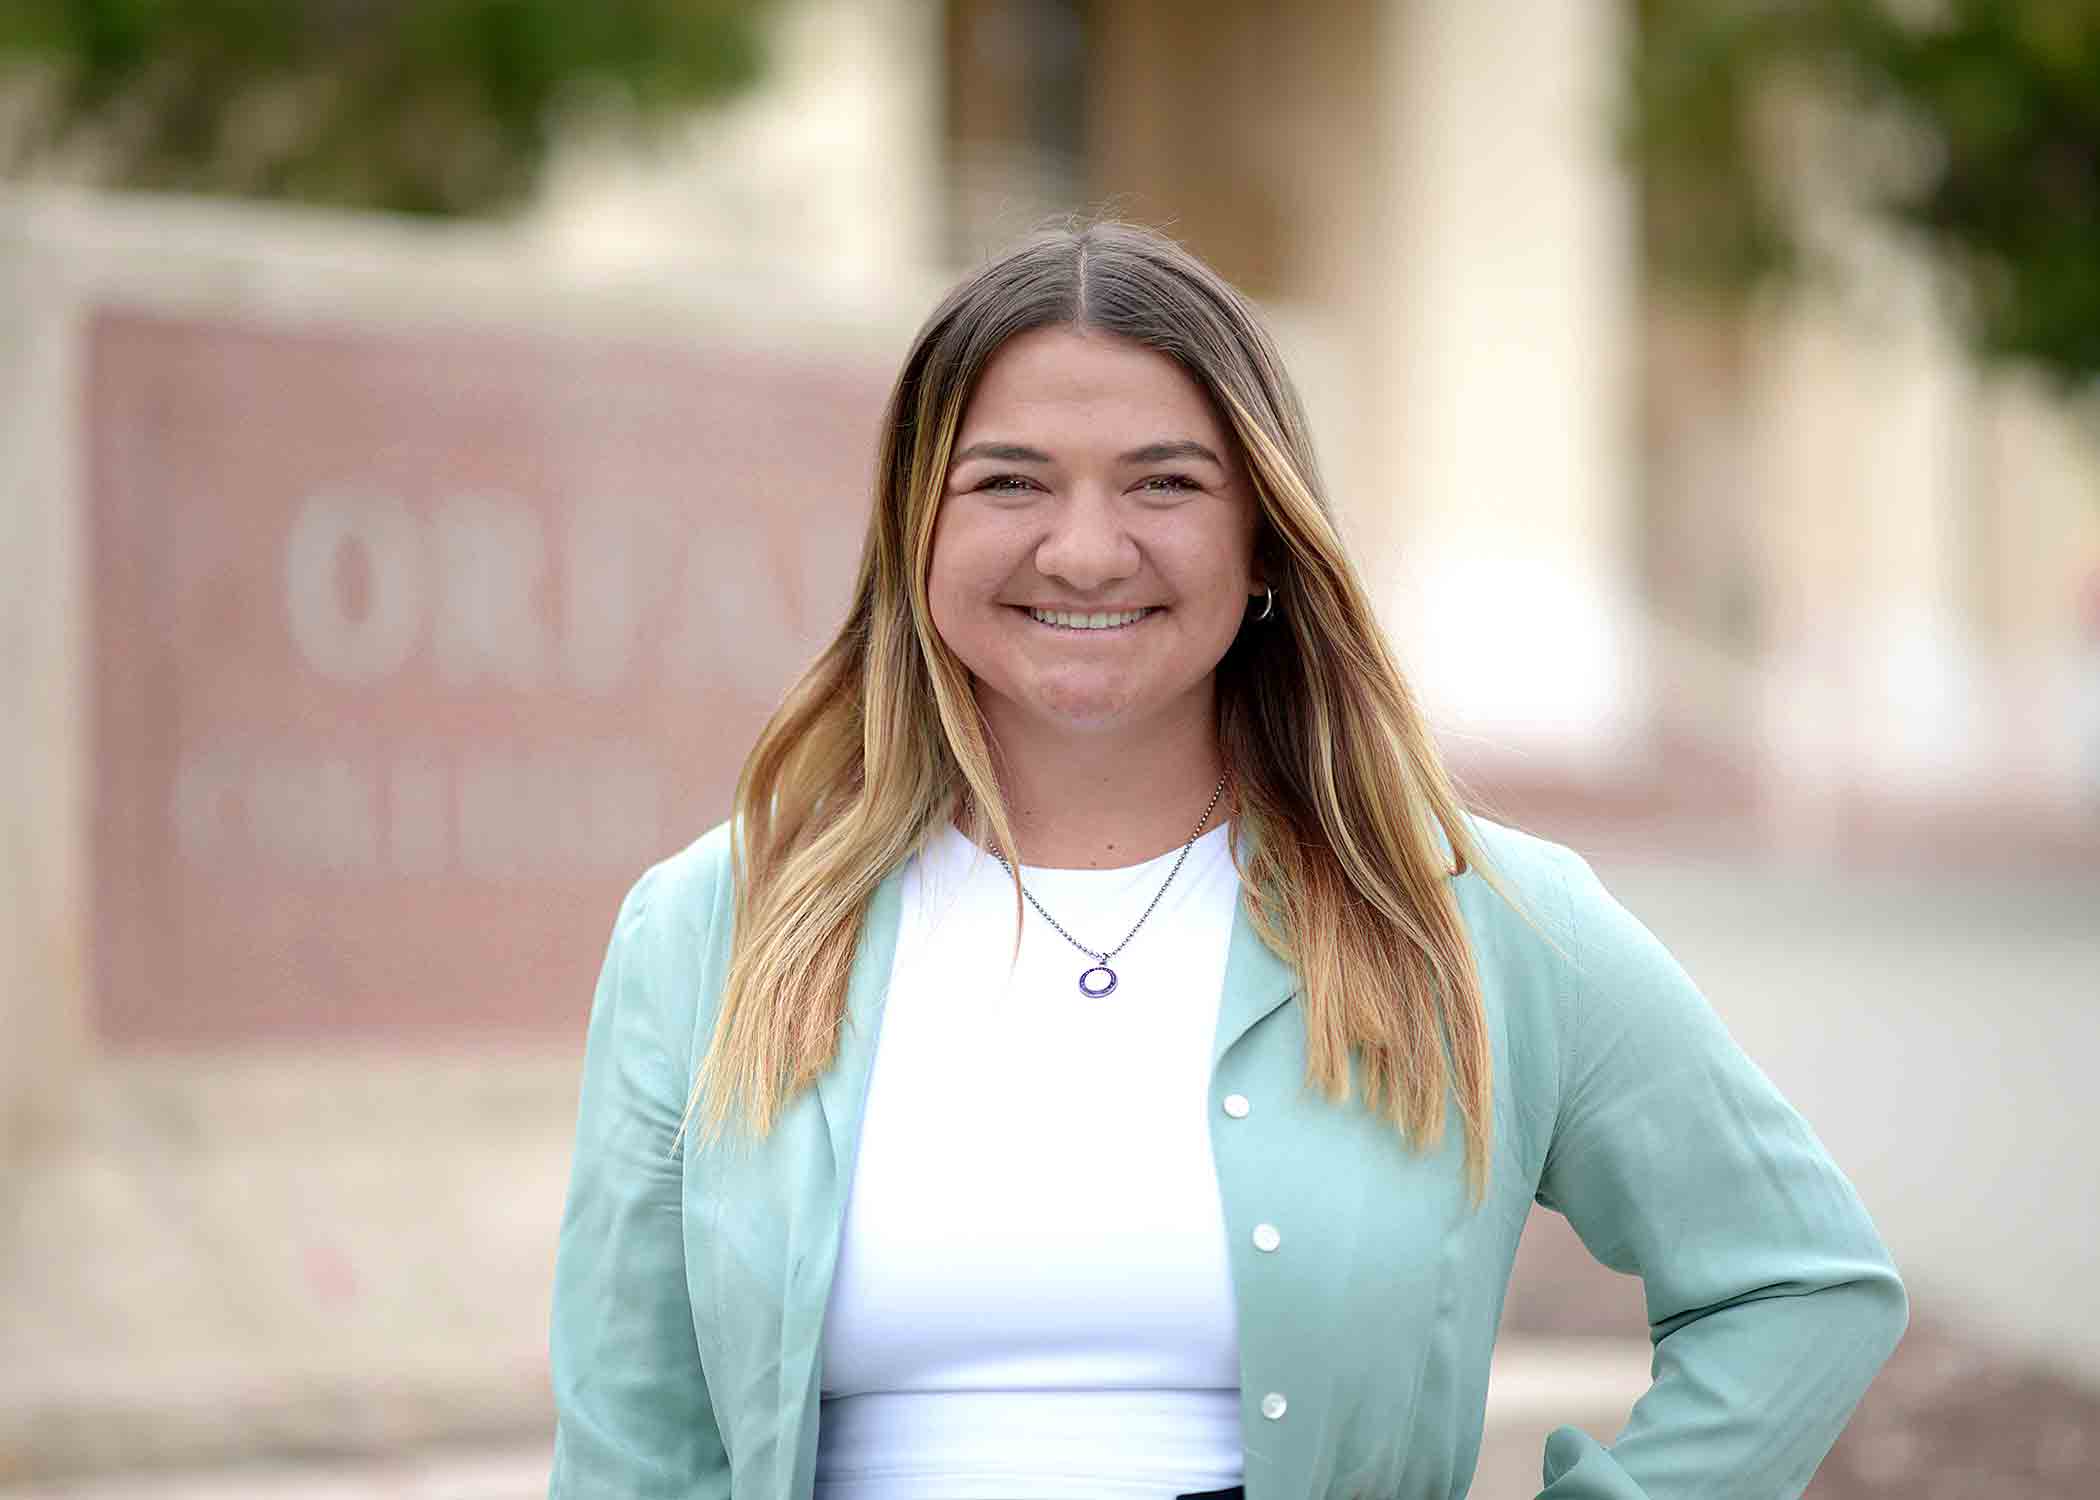 Carolyn Lidster received multiple honors as a business administration student